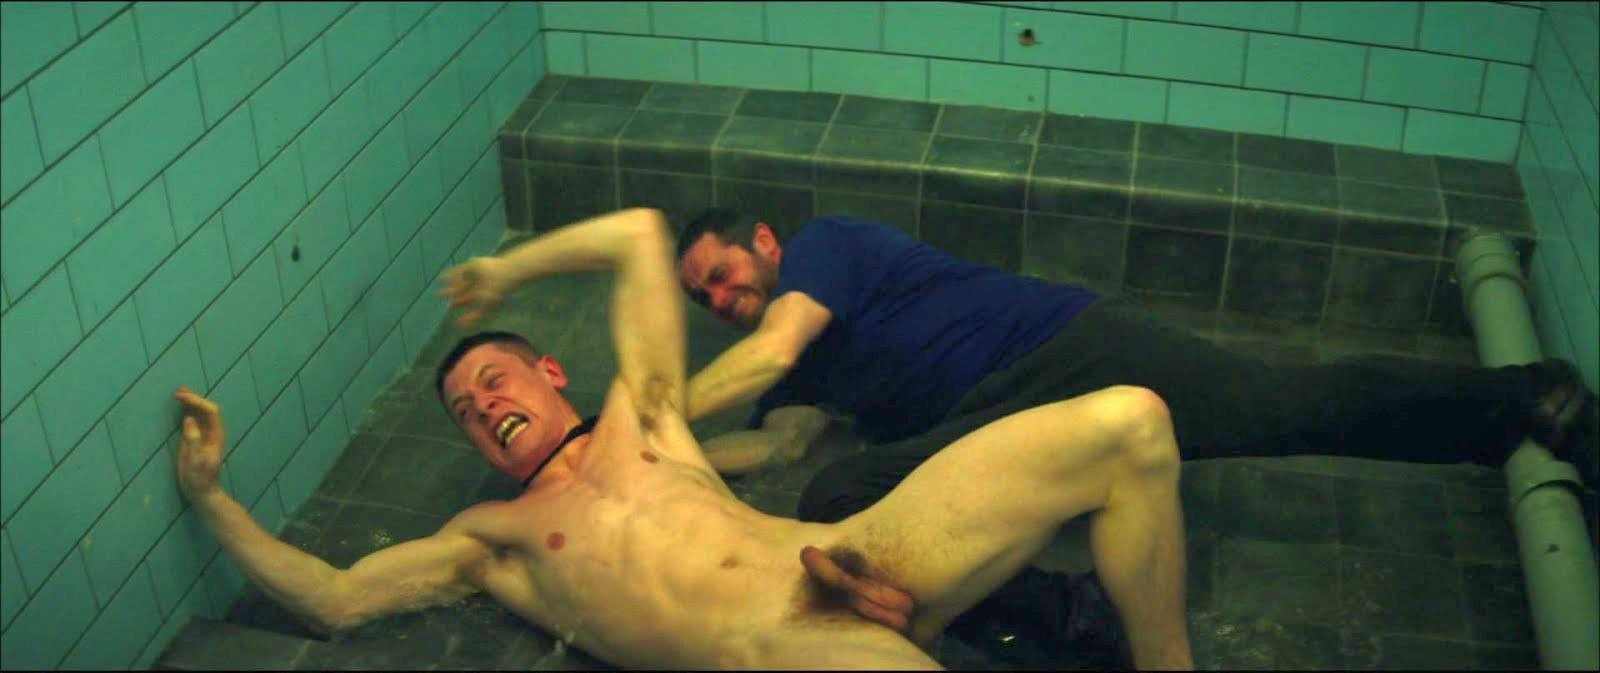 Jack O'Connell nudo in "Il ribelle - Starred Up" (2013) .